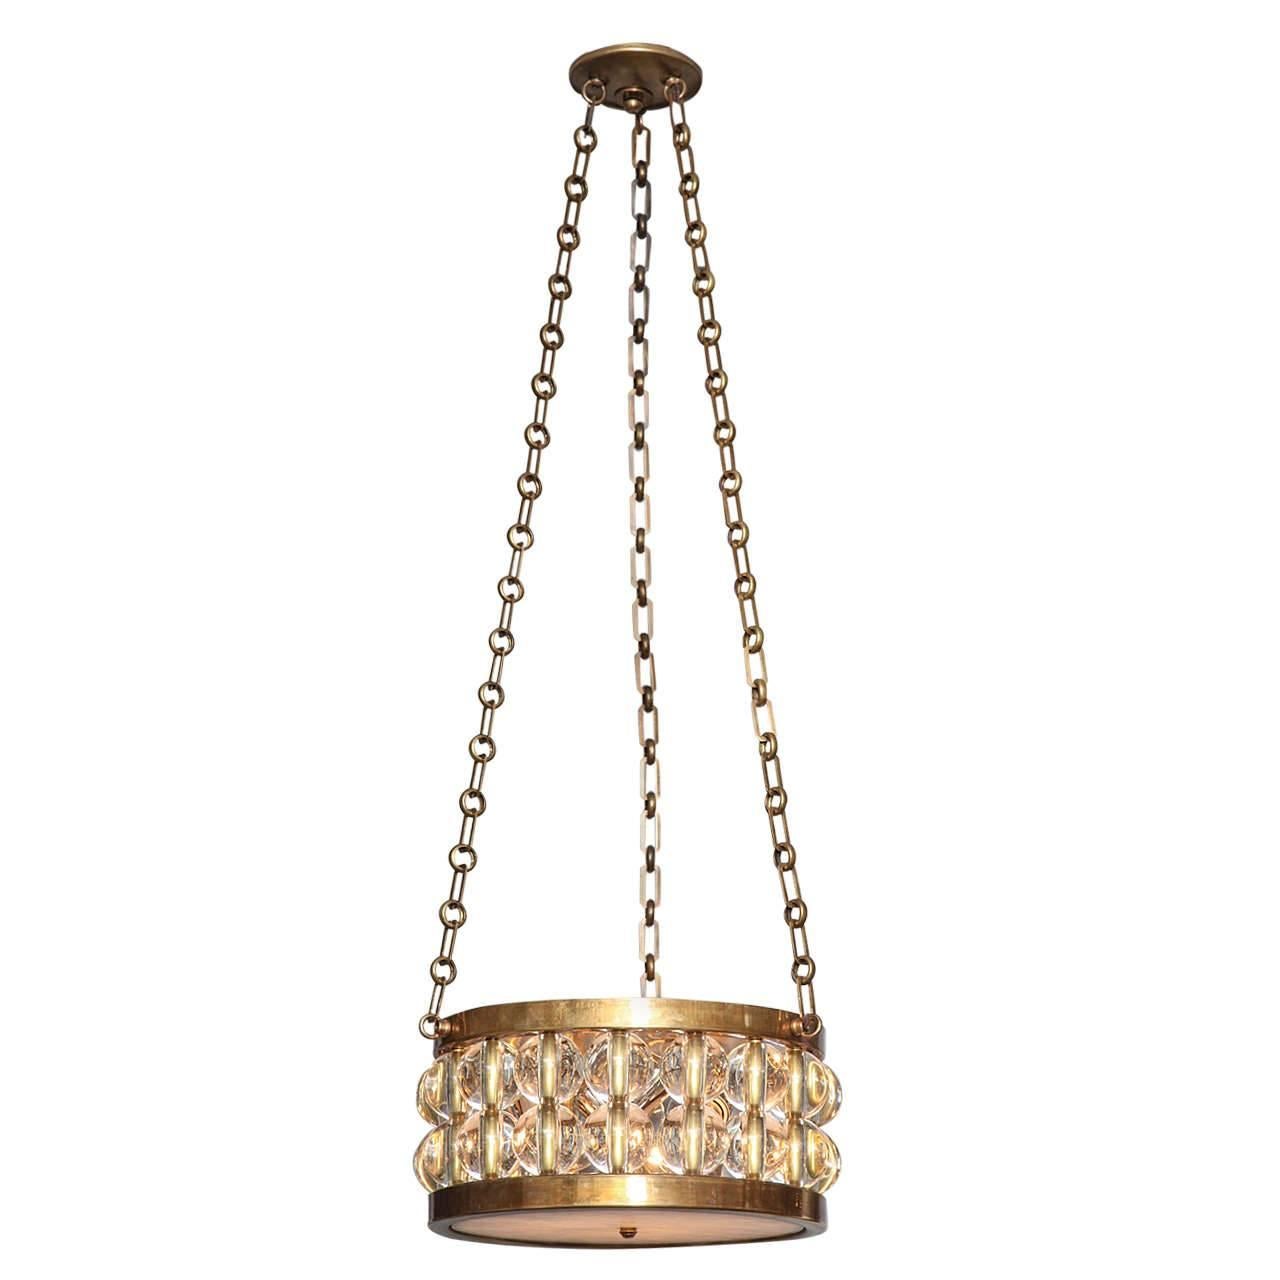 Two-Tiered Tambour Pendant Light With Chain by David Duncan